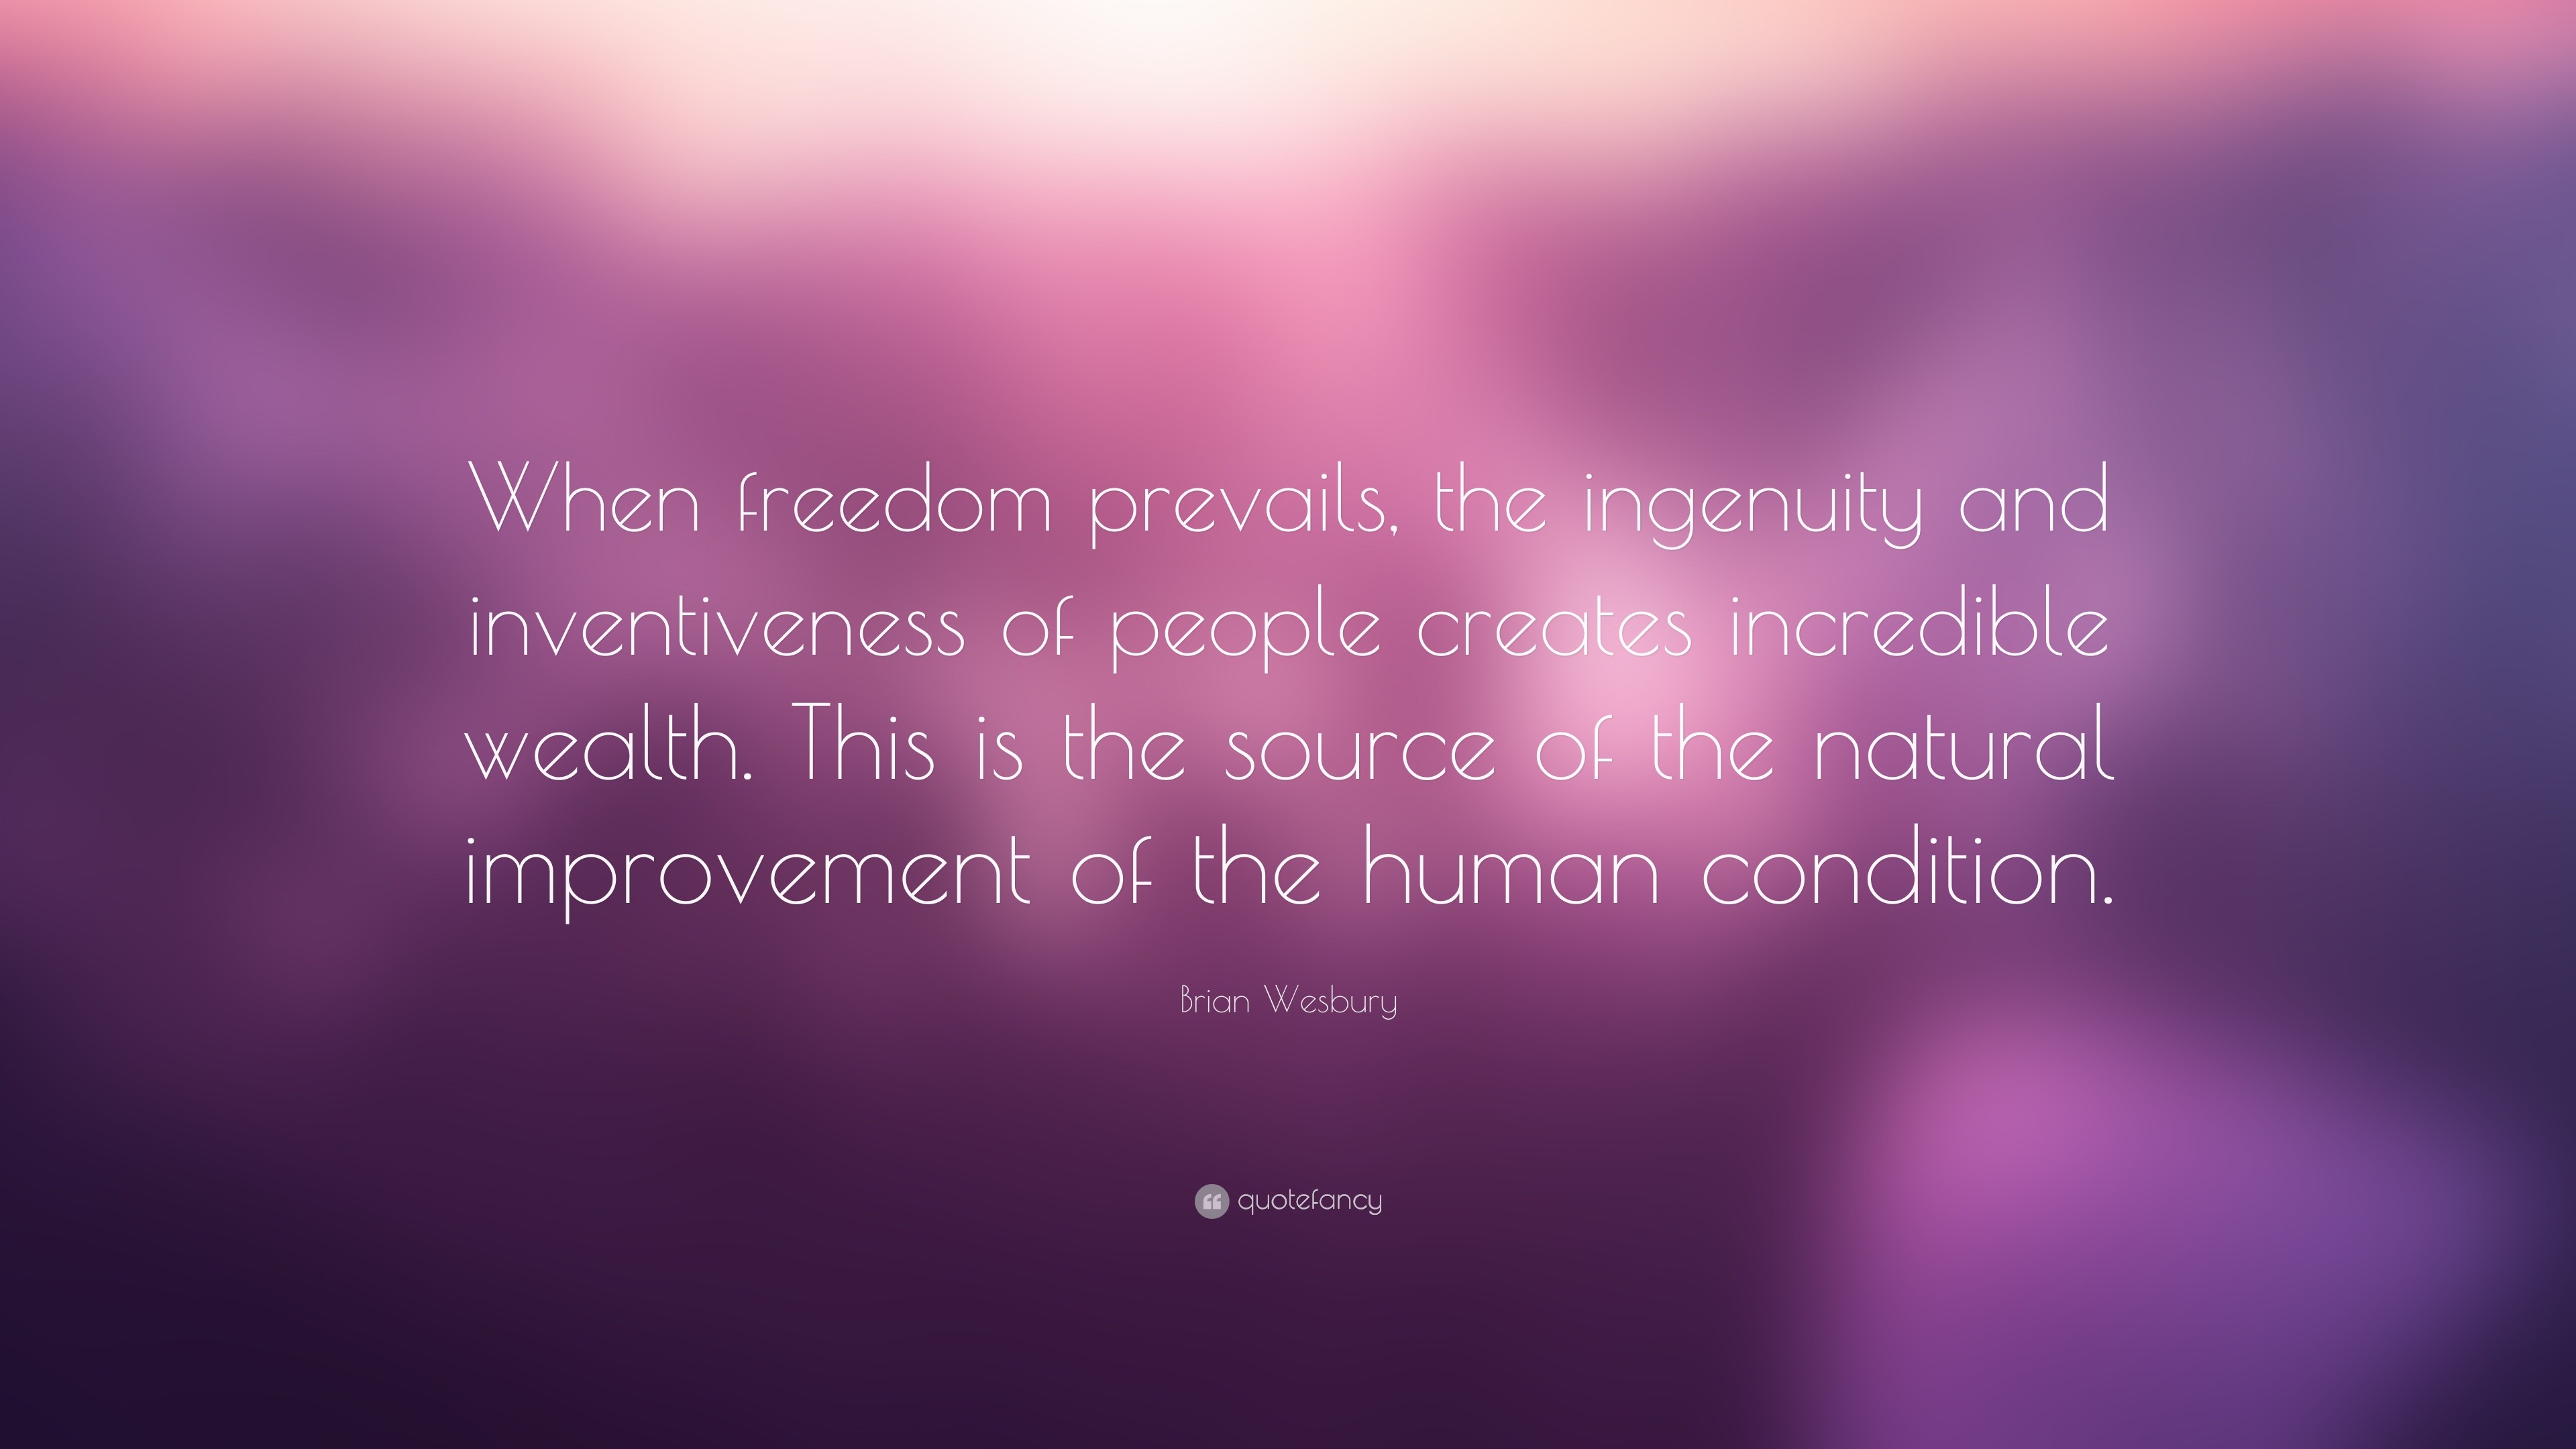 Brian Wesbury Quote: “When freedom prevails, the ingenuity and ...